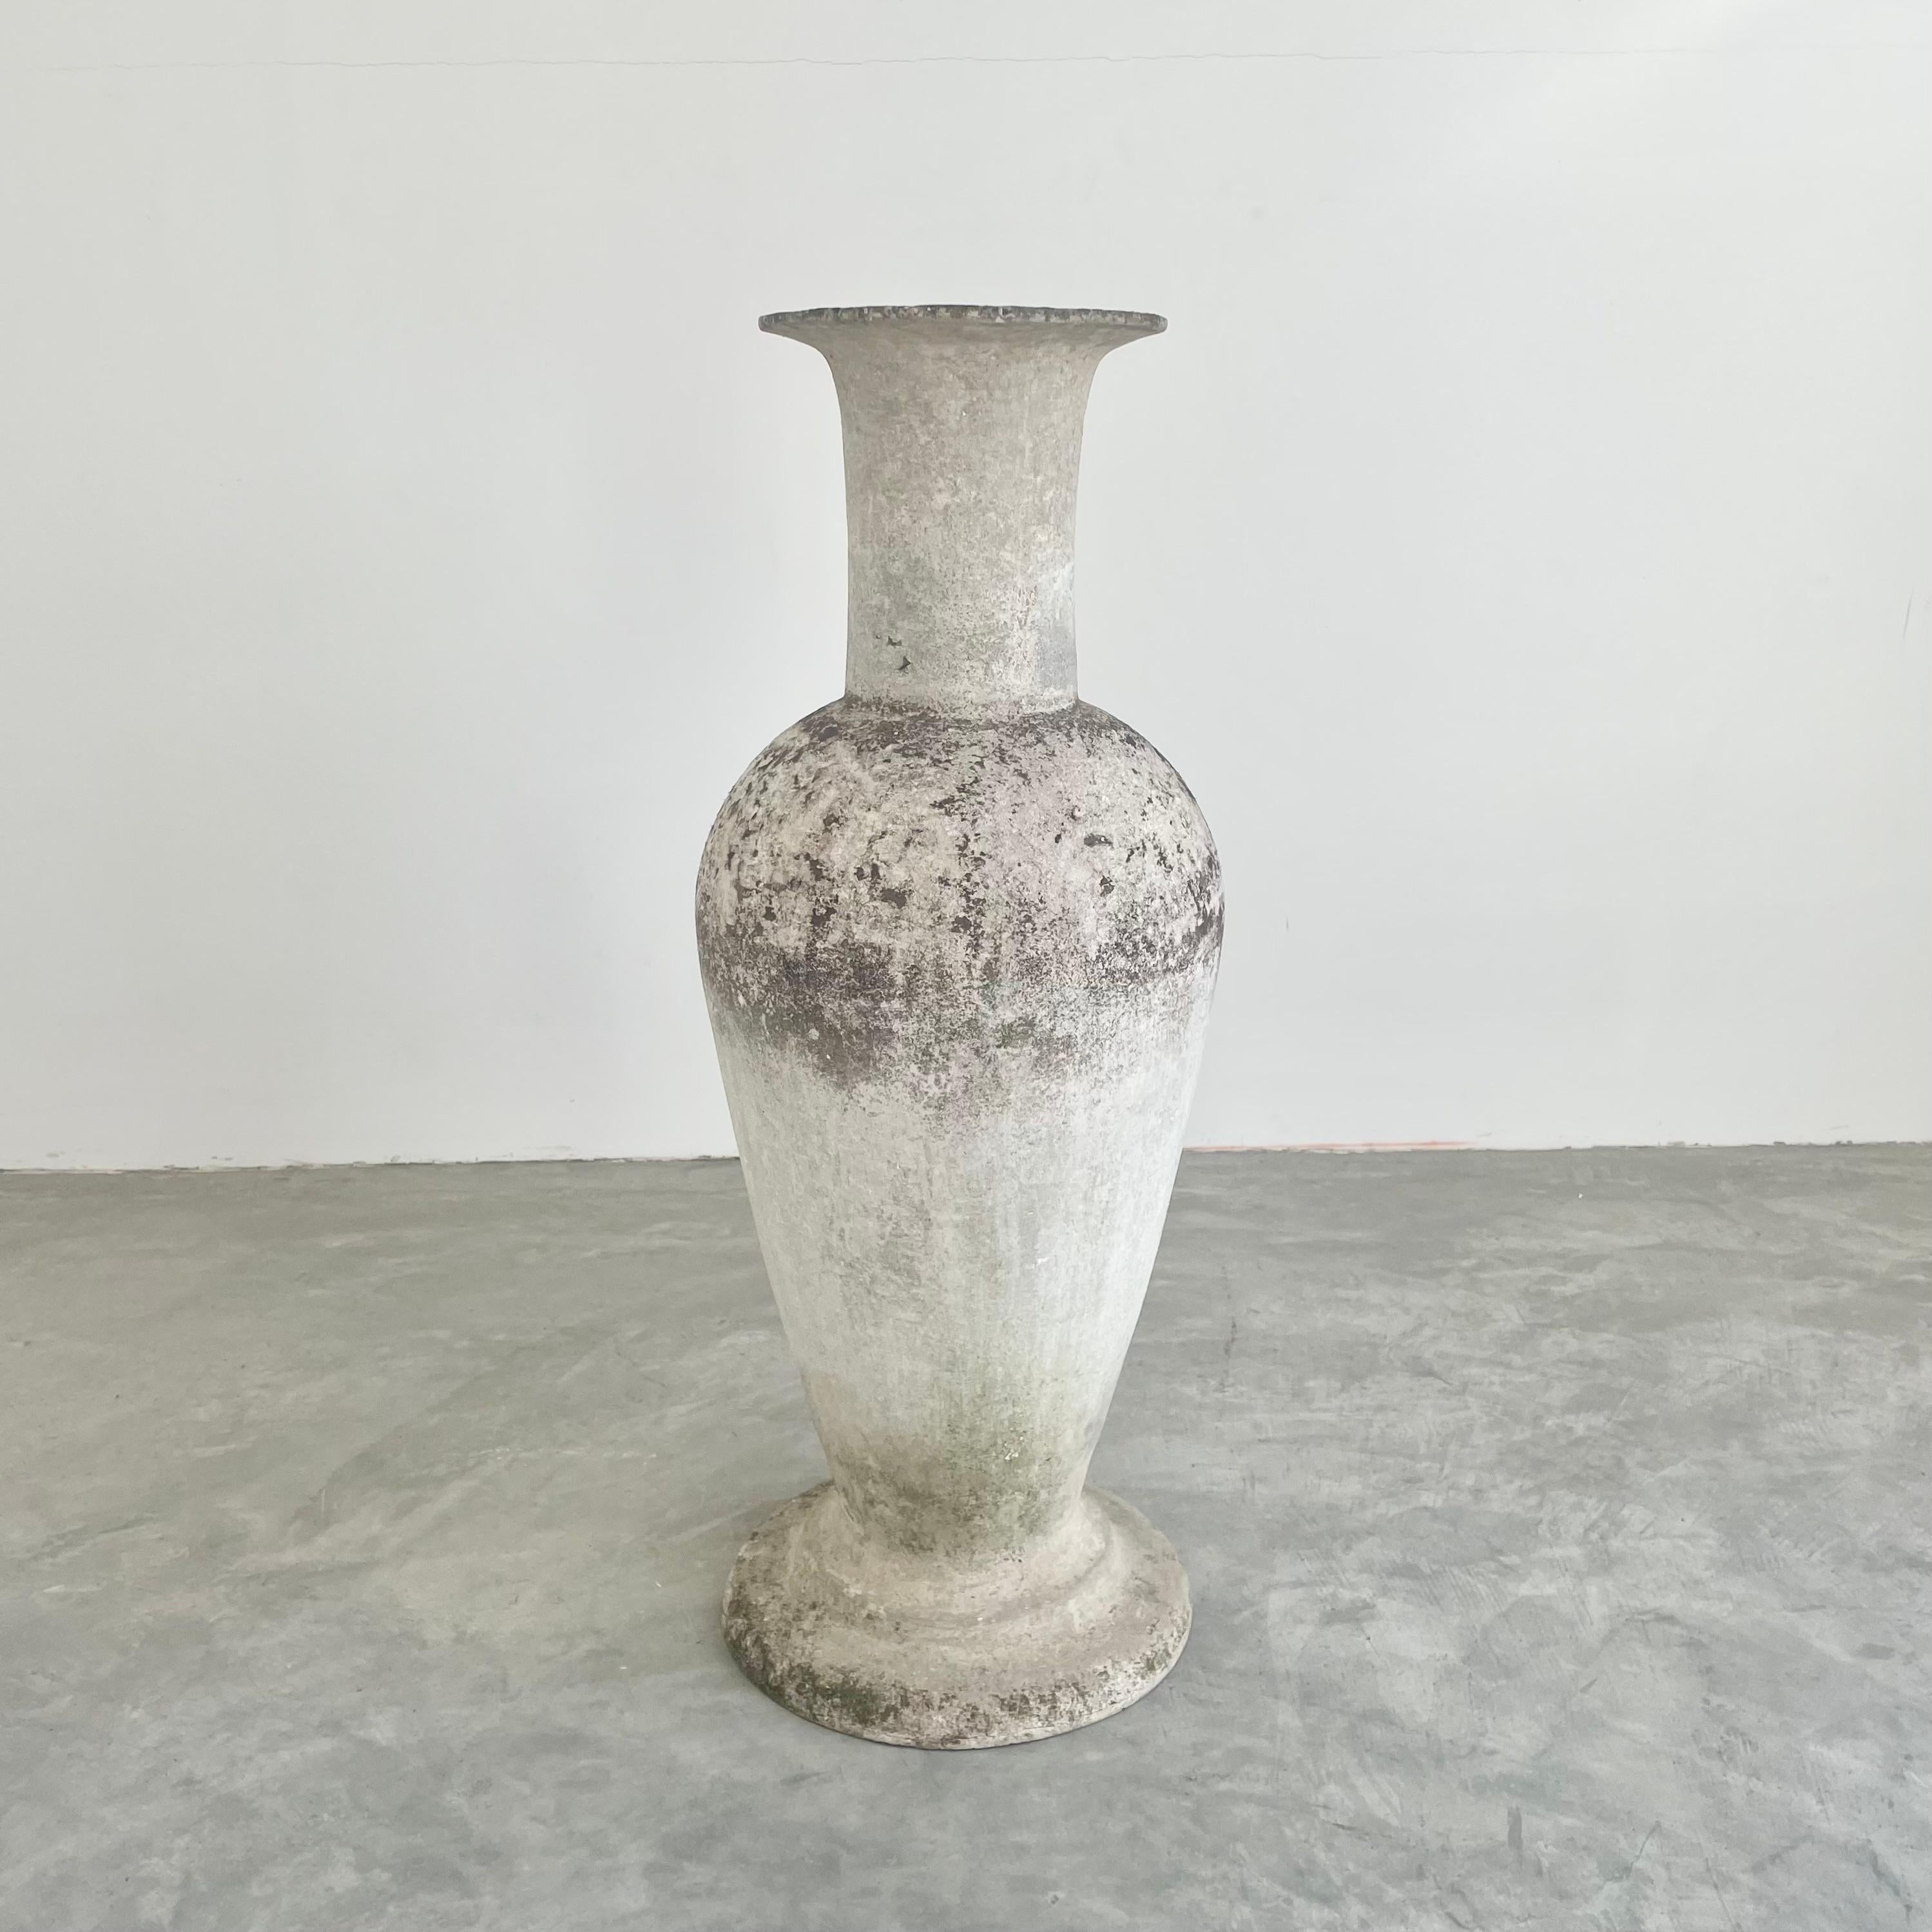 Stunning concrete vase by Willy Guhl. Just under three feet tall. Extremely rare model. Made of fiber cement. Decades of patina and moss/ lichen. Colors vary from grey to white and charcoal. Beautiful texture and color with great presence and a